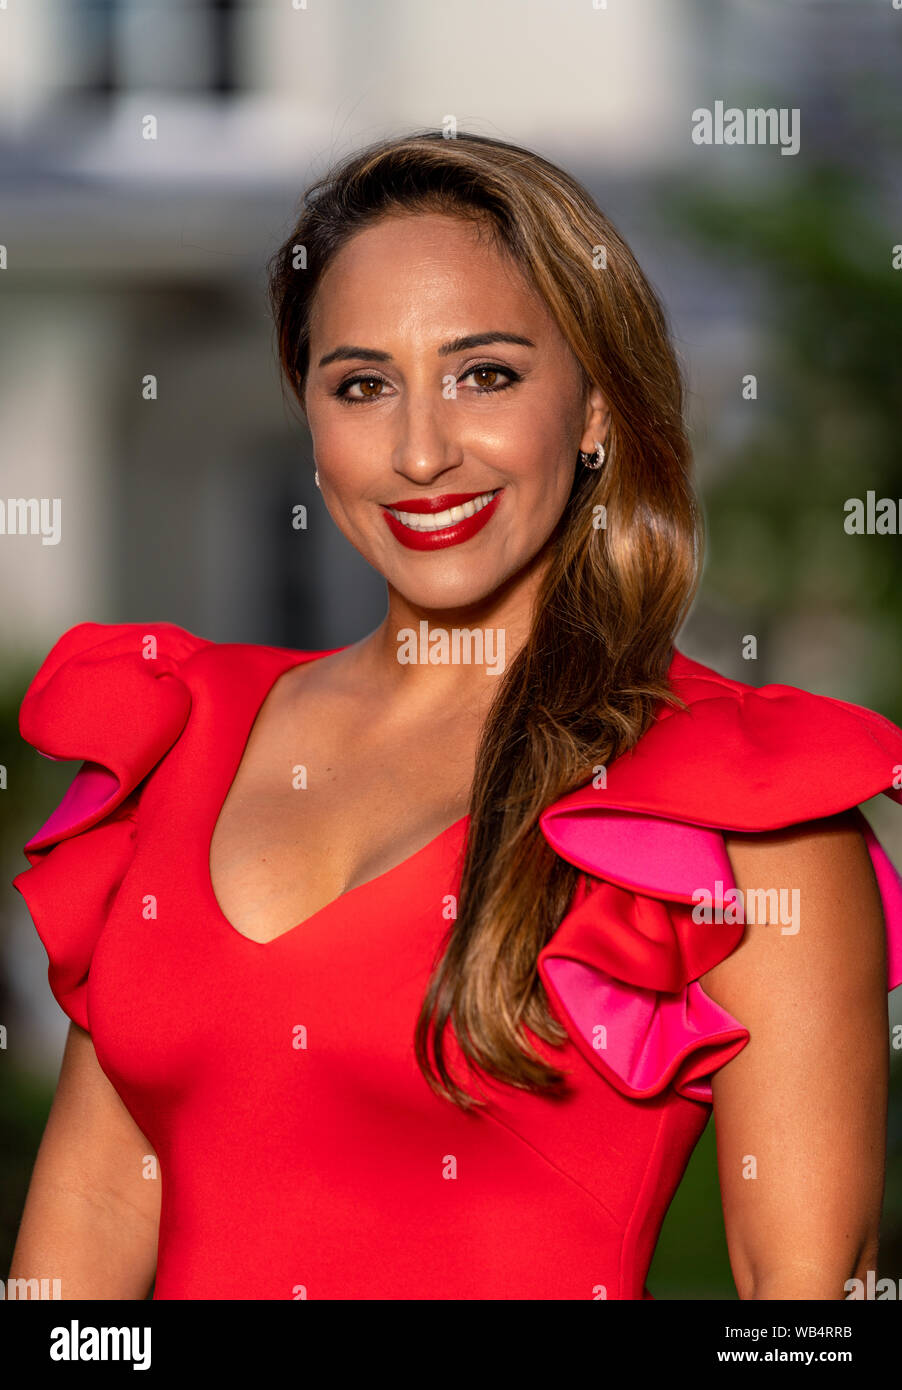 Portrait of a mixed race business woman smiling in red dress outside with a house in the background Stock Photo